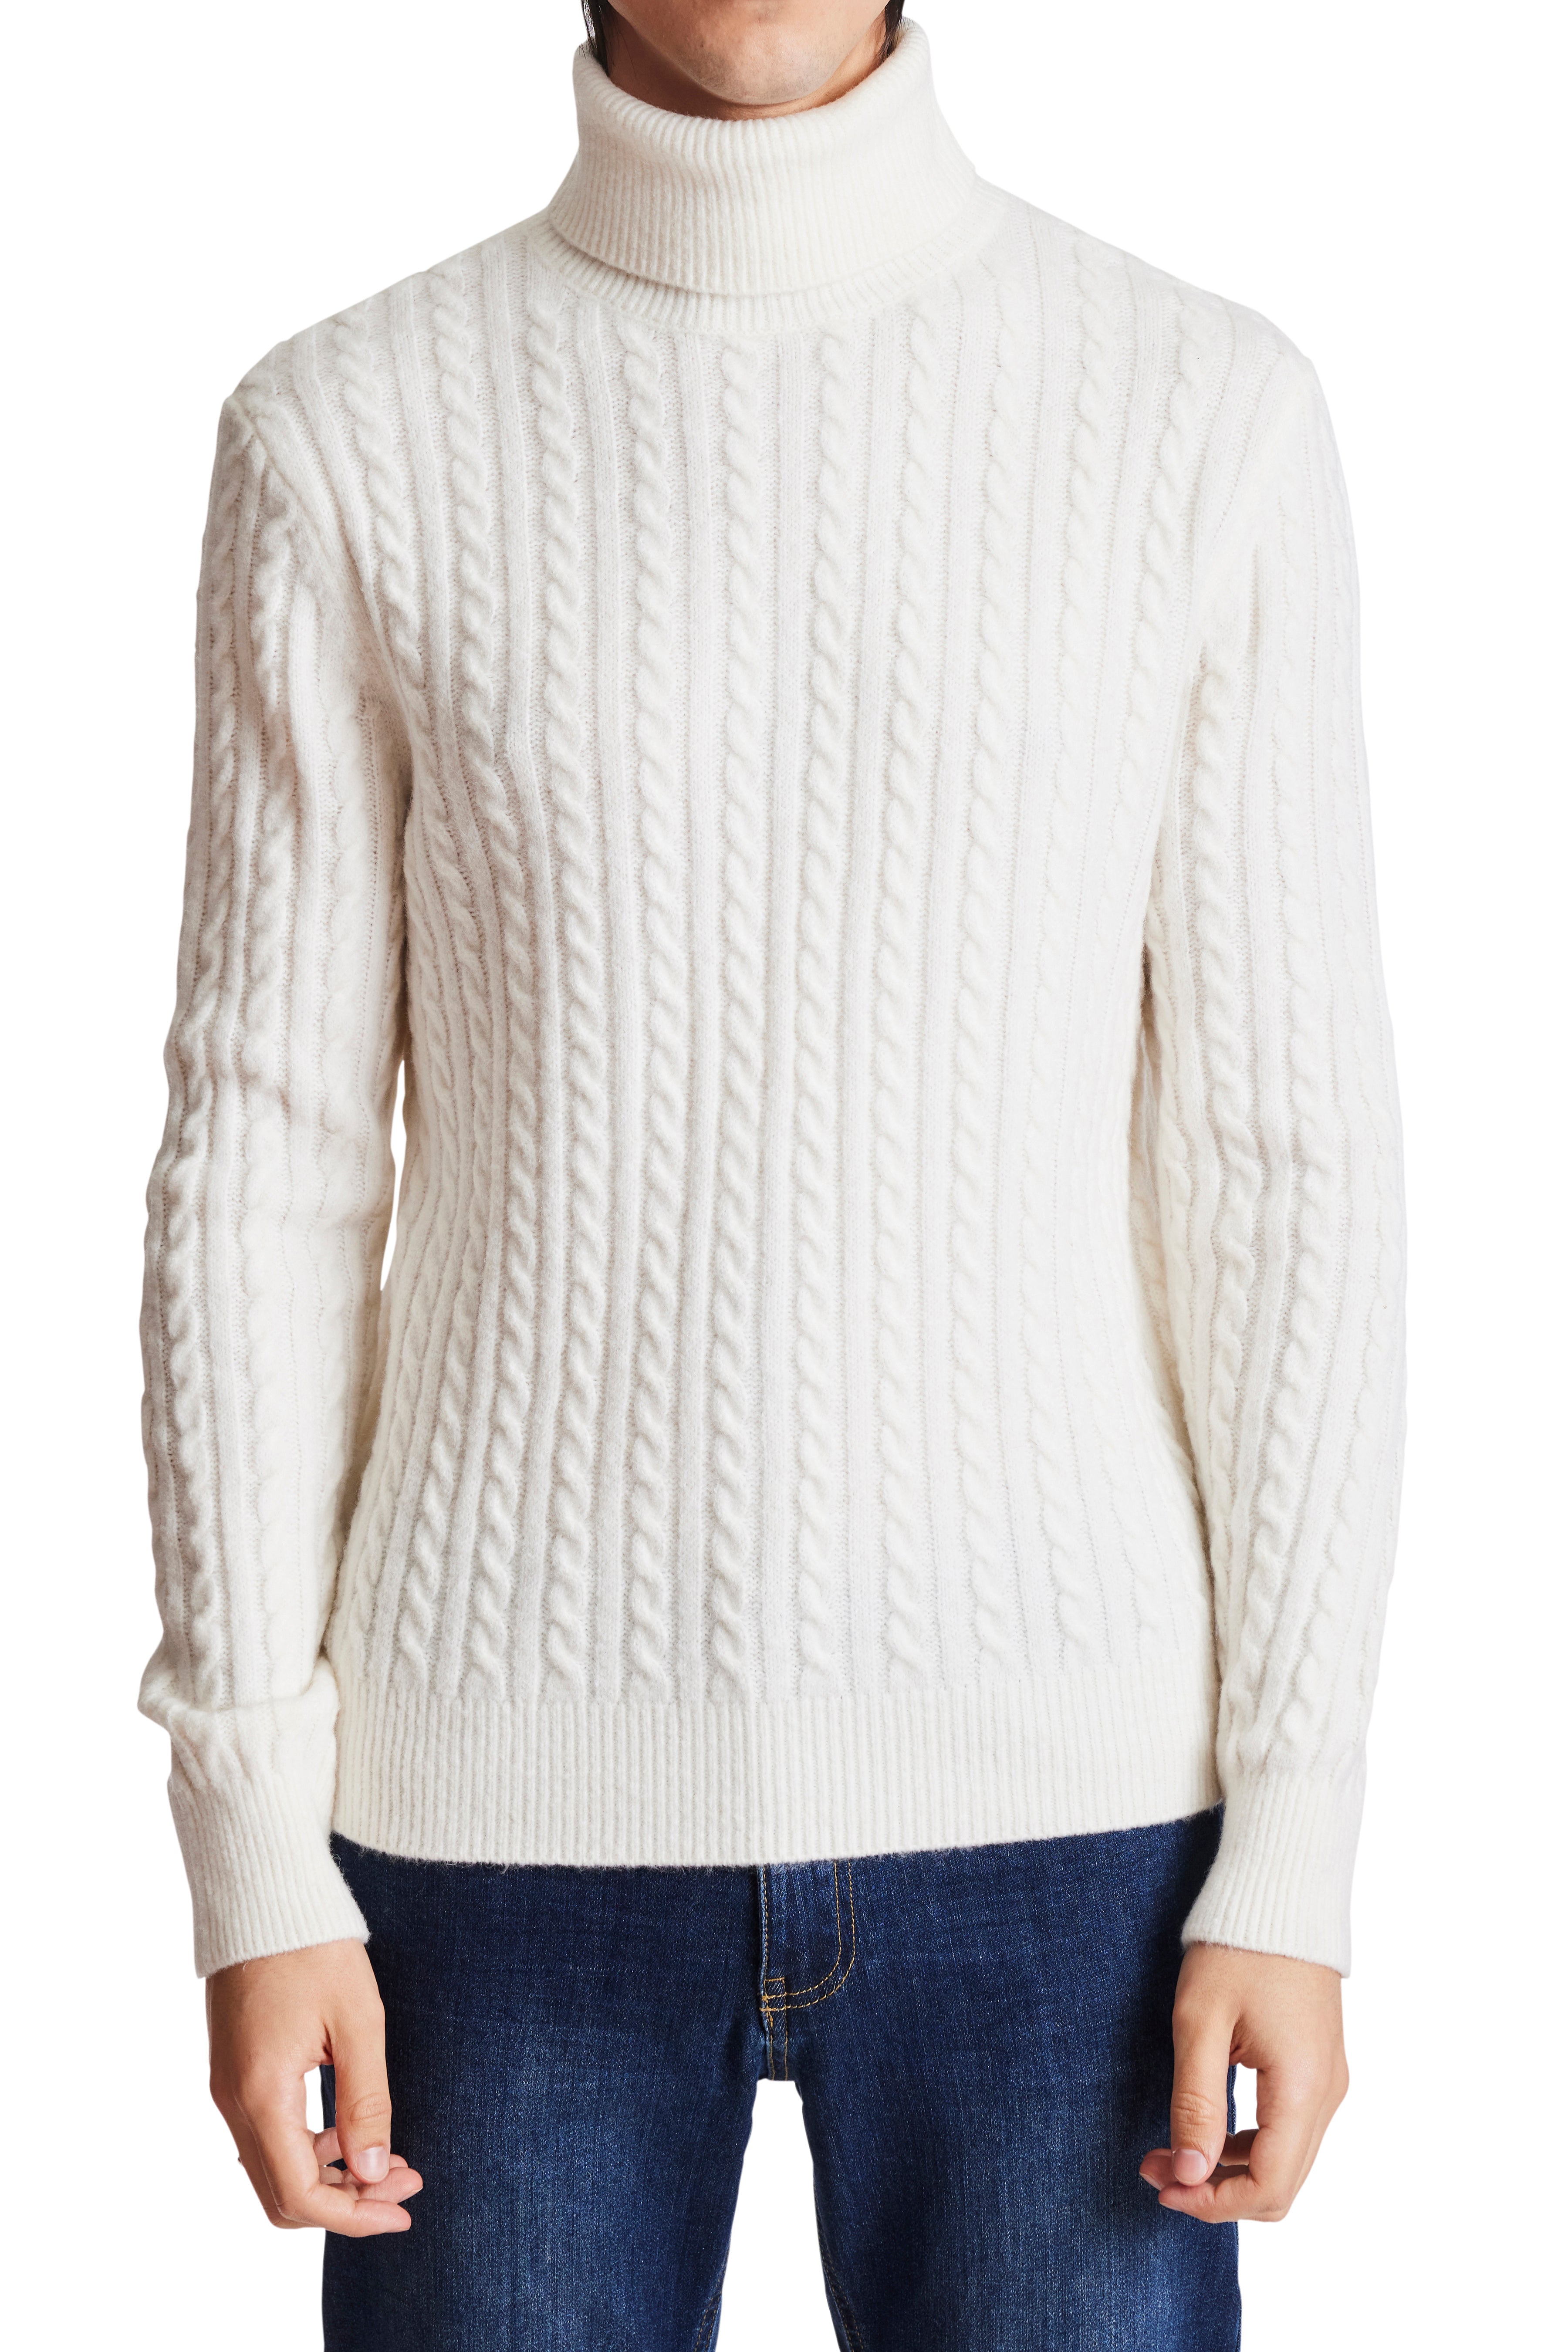 cable knit turtleneck sweater, turtleneck cable knit sweater